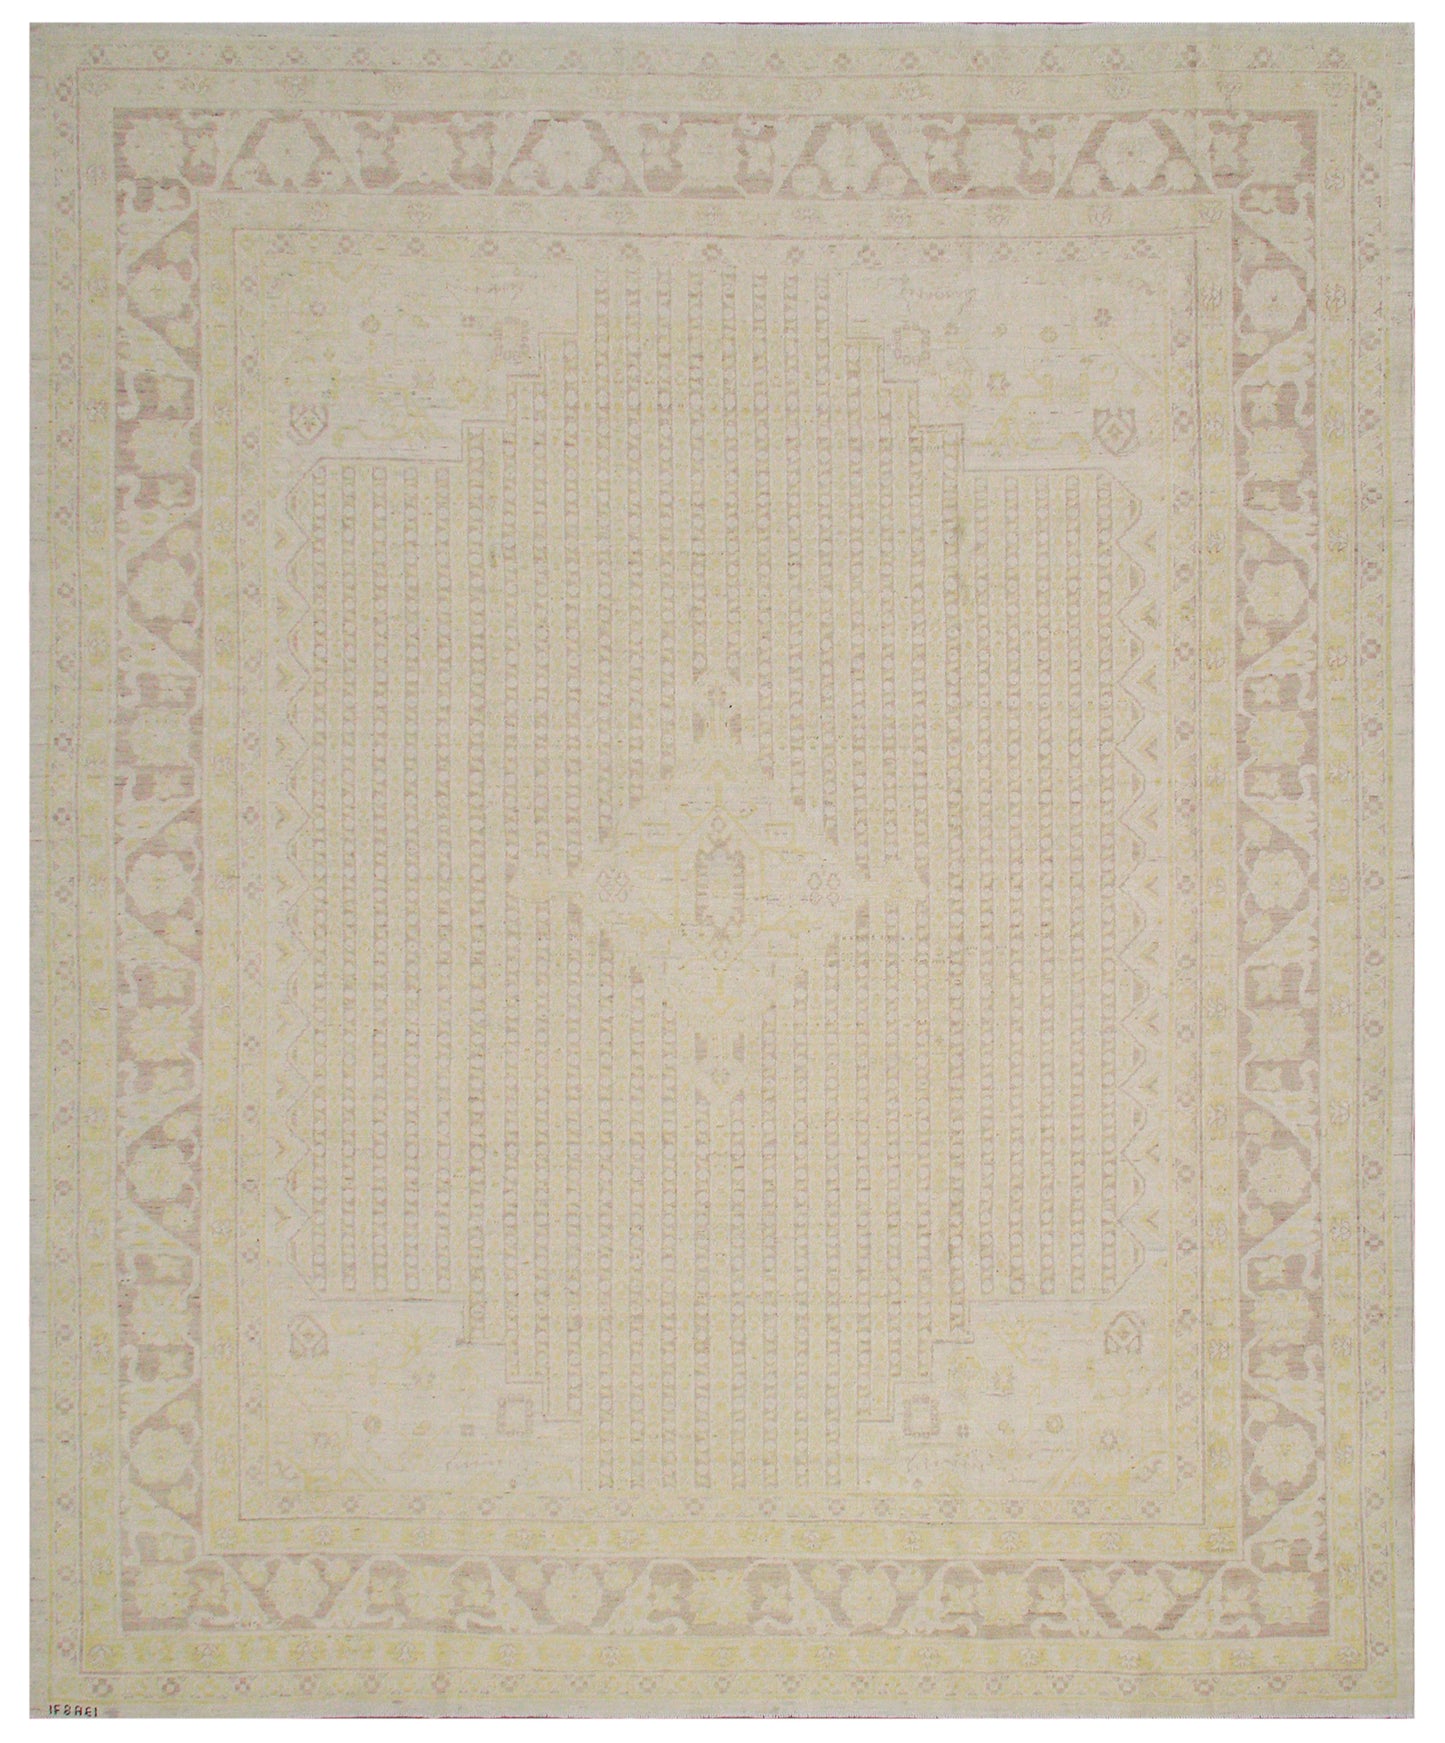 9.06 x  7.09 Soft Color Palette Persian Design Hand-Knotted By specialized Ariana Artisans Weavers